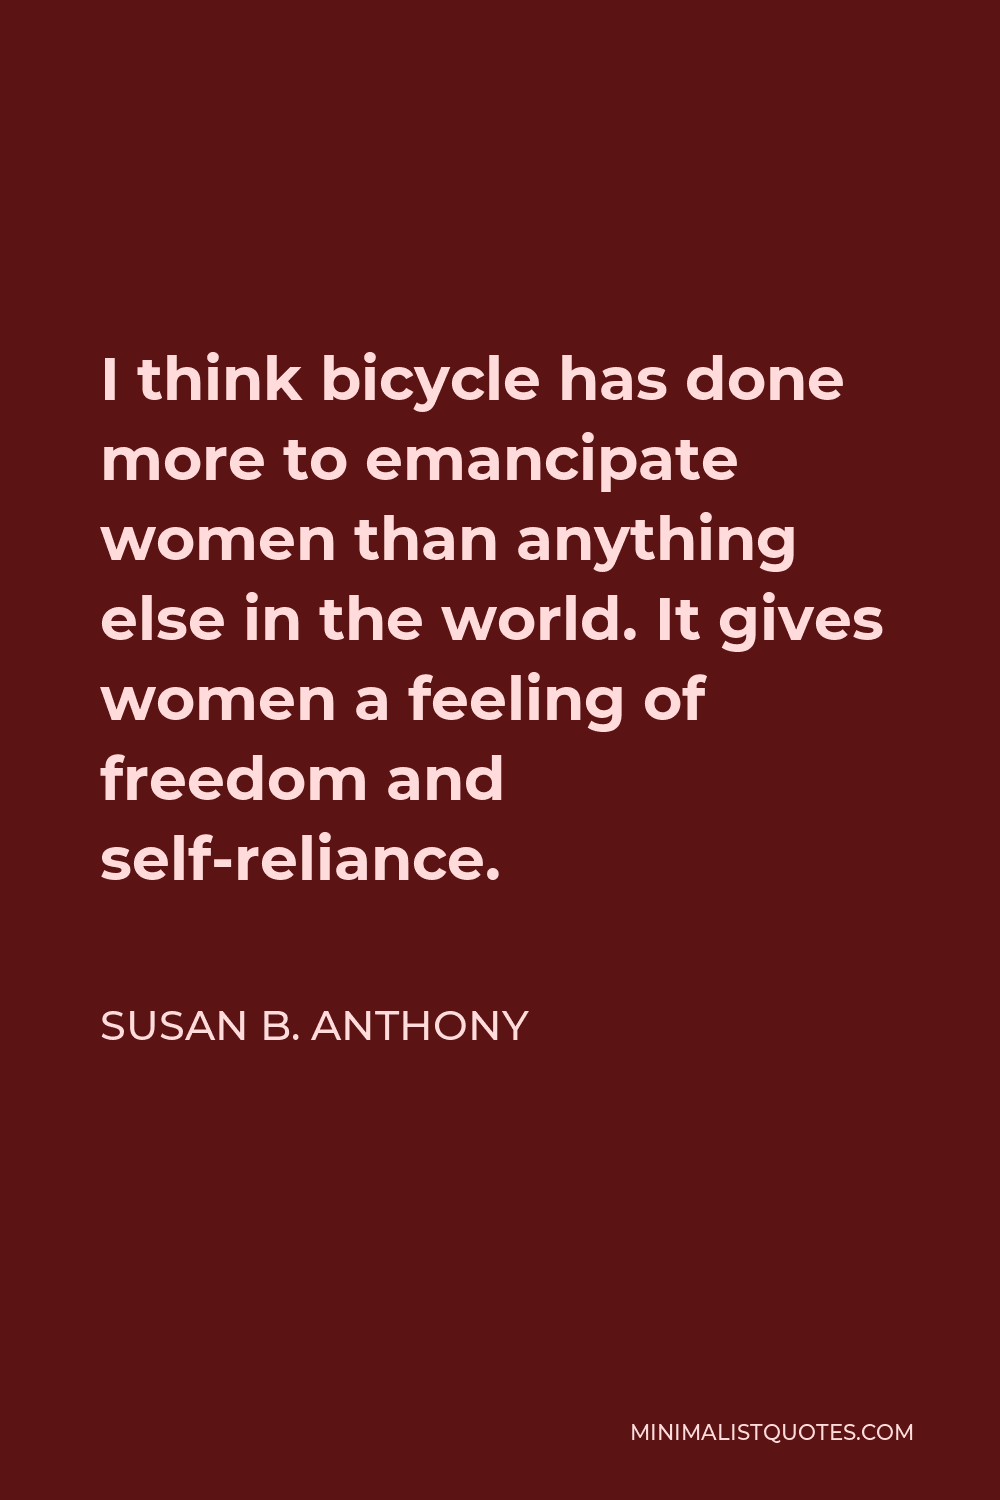 Susan B. Anthony Quote - I think bicycle has done more to emancipate women than anything else in the world. It gives women a feeling of freedom and self-reliance.